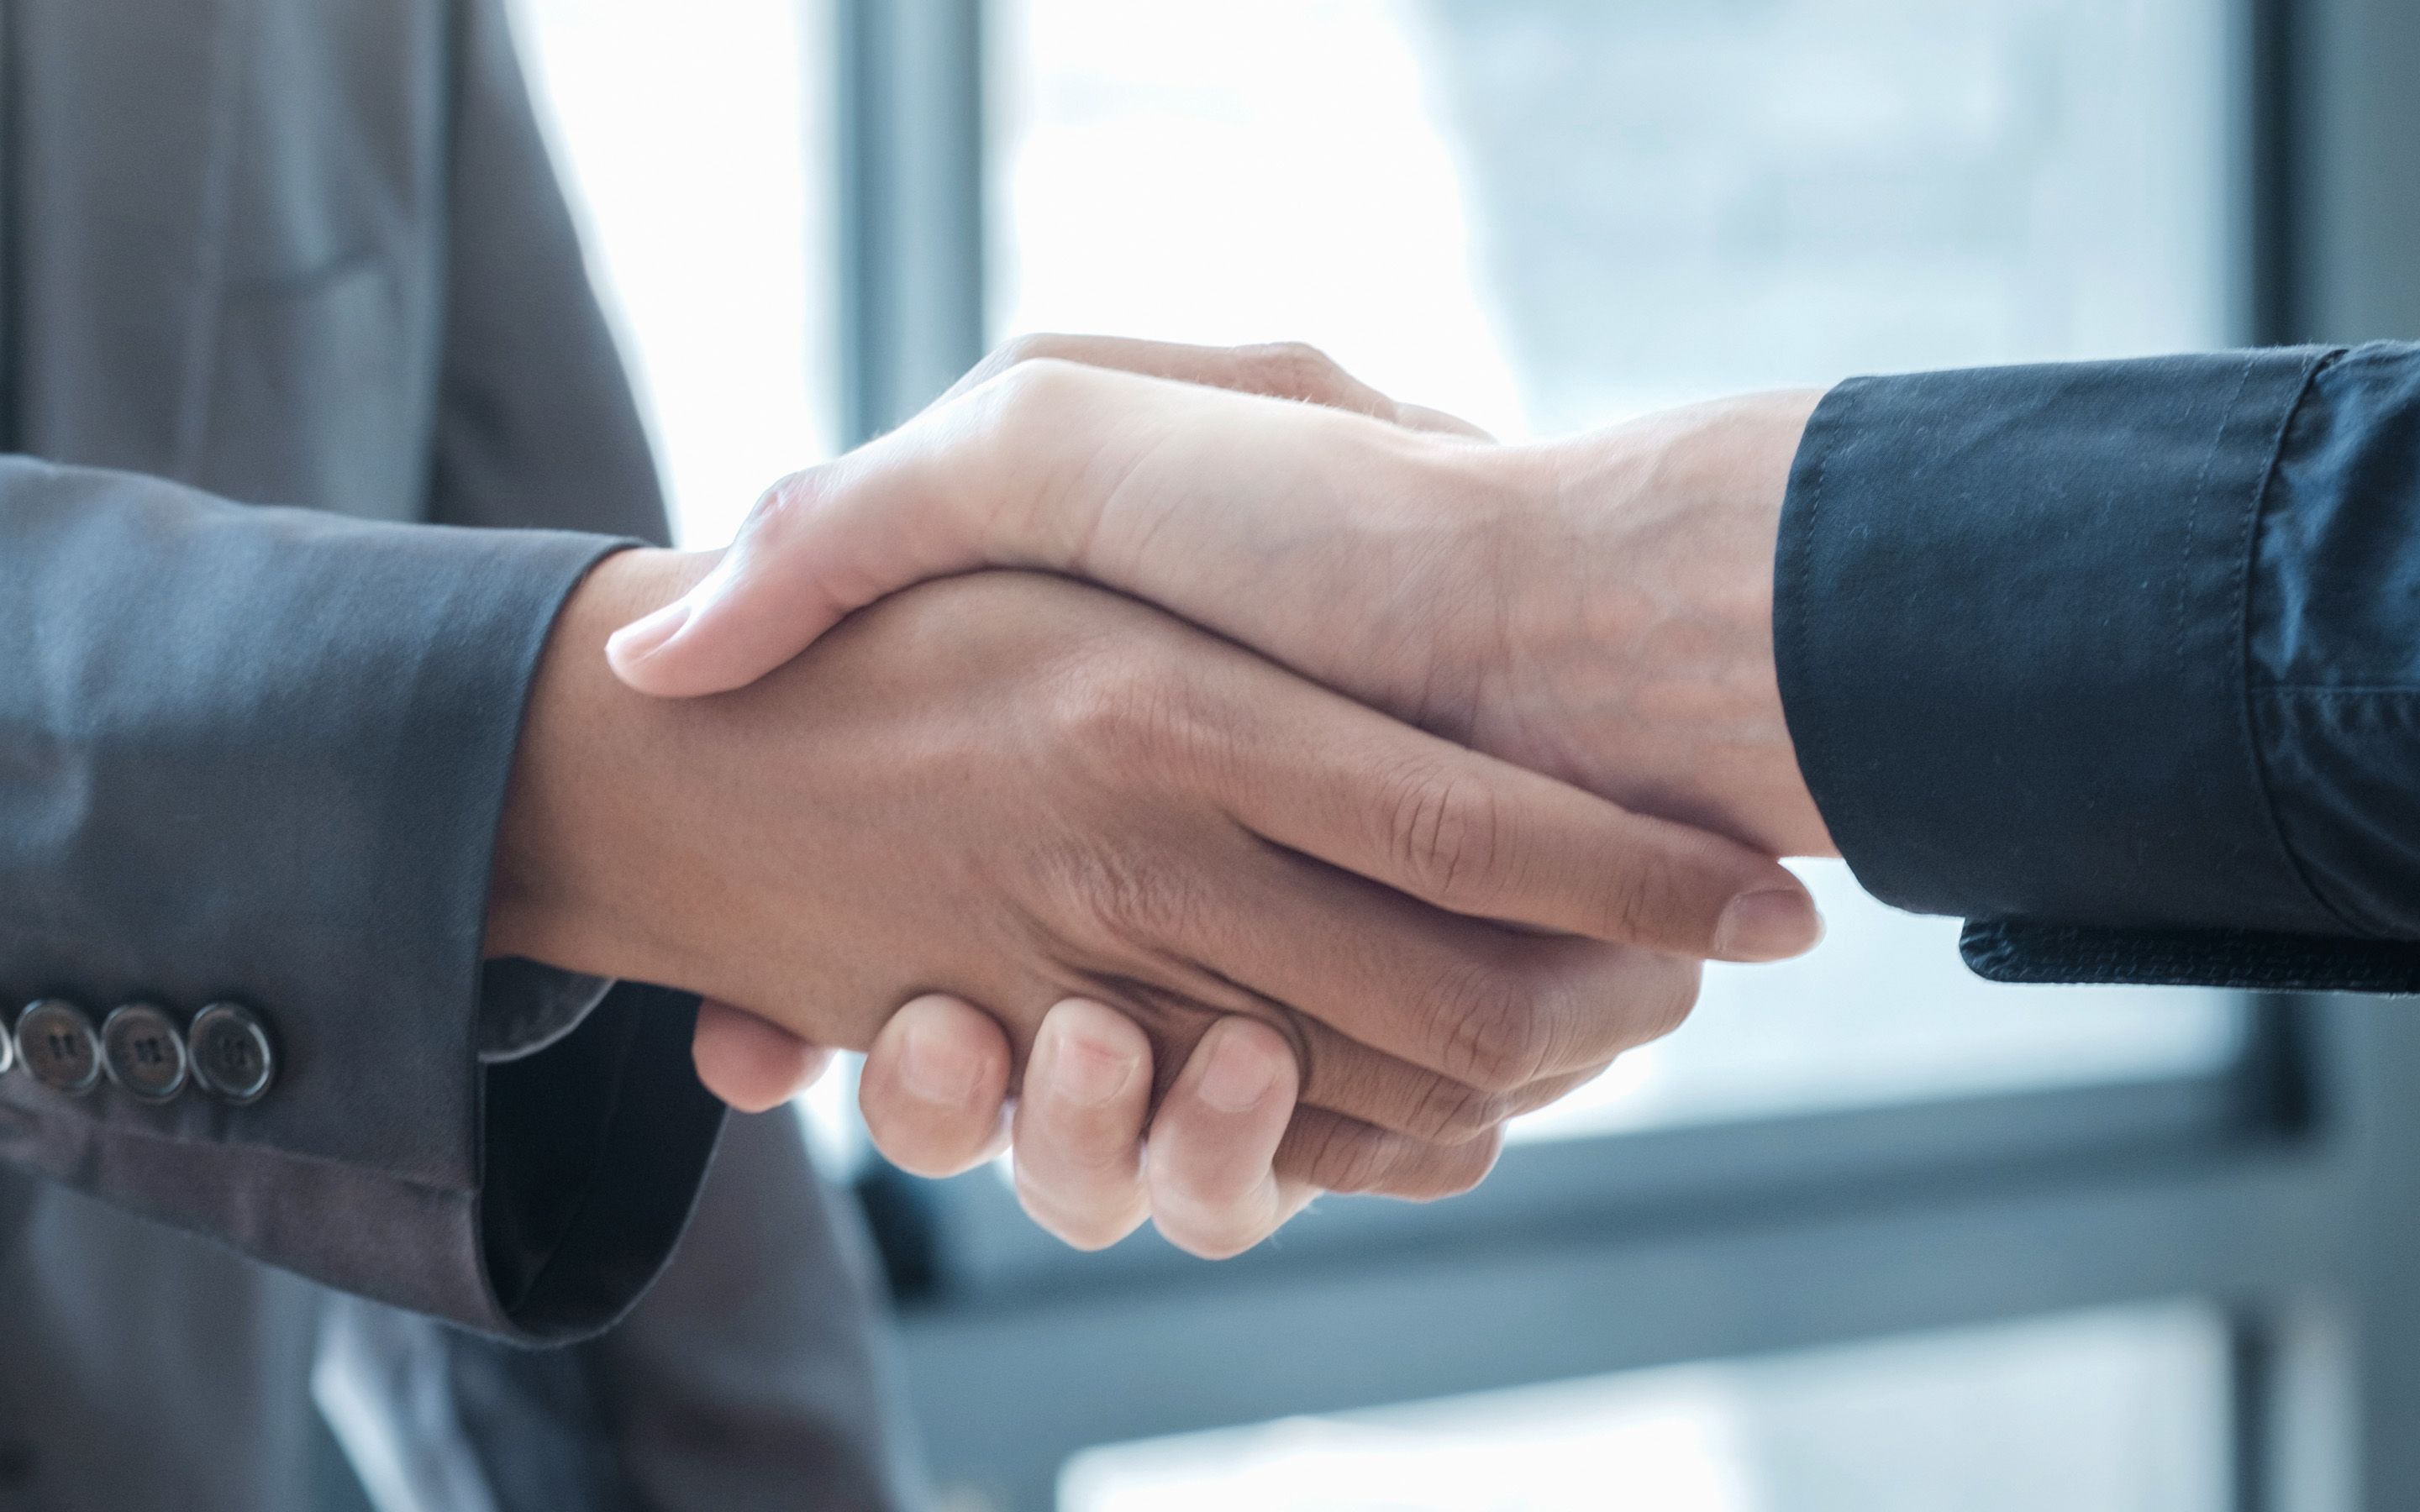 Download wallpaper handshake, business people, business concepts, handshake concepts, closing a deal, deal concepts for desktop with resolution 2880x1800. High Quality HD picture wallpaper